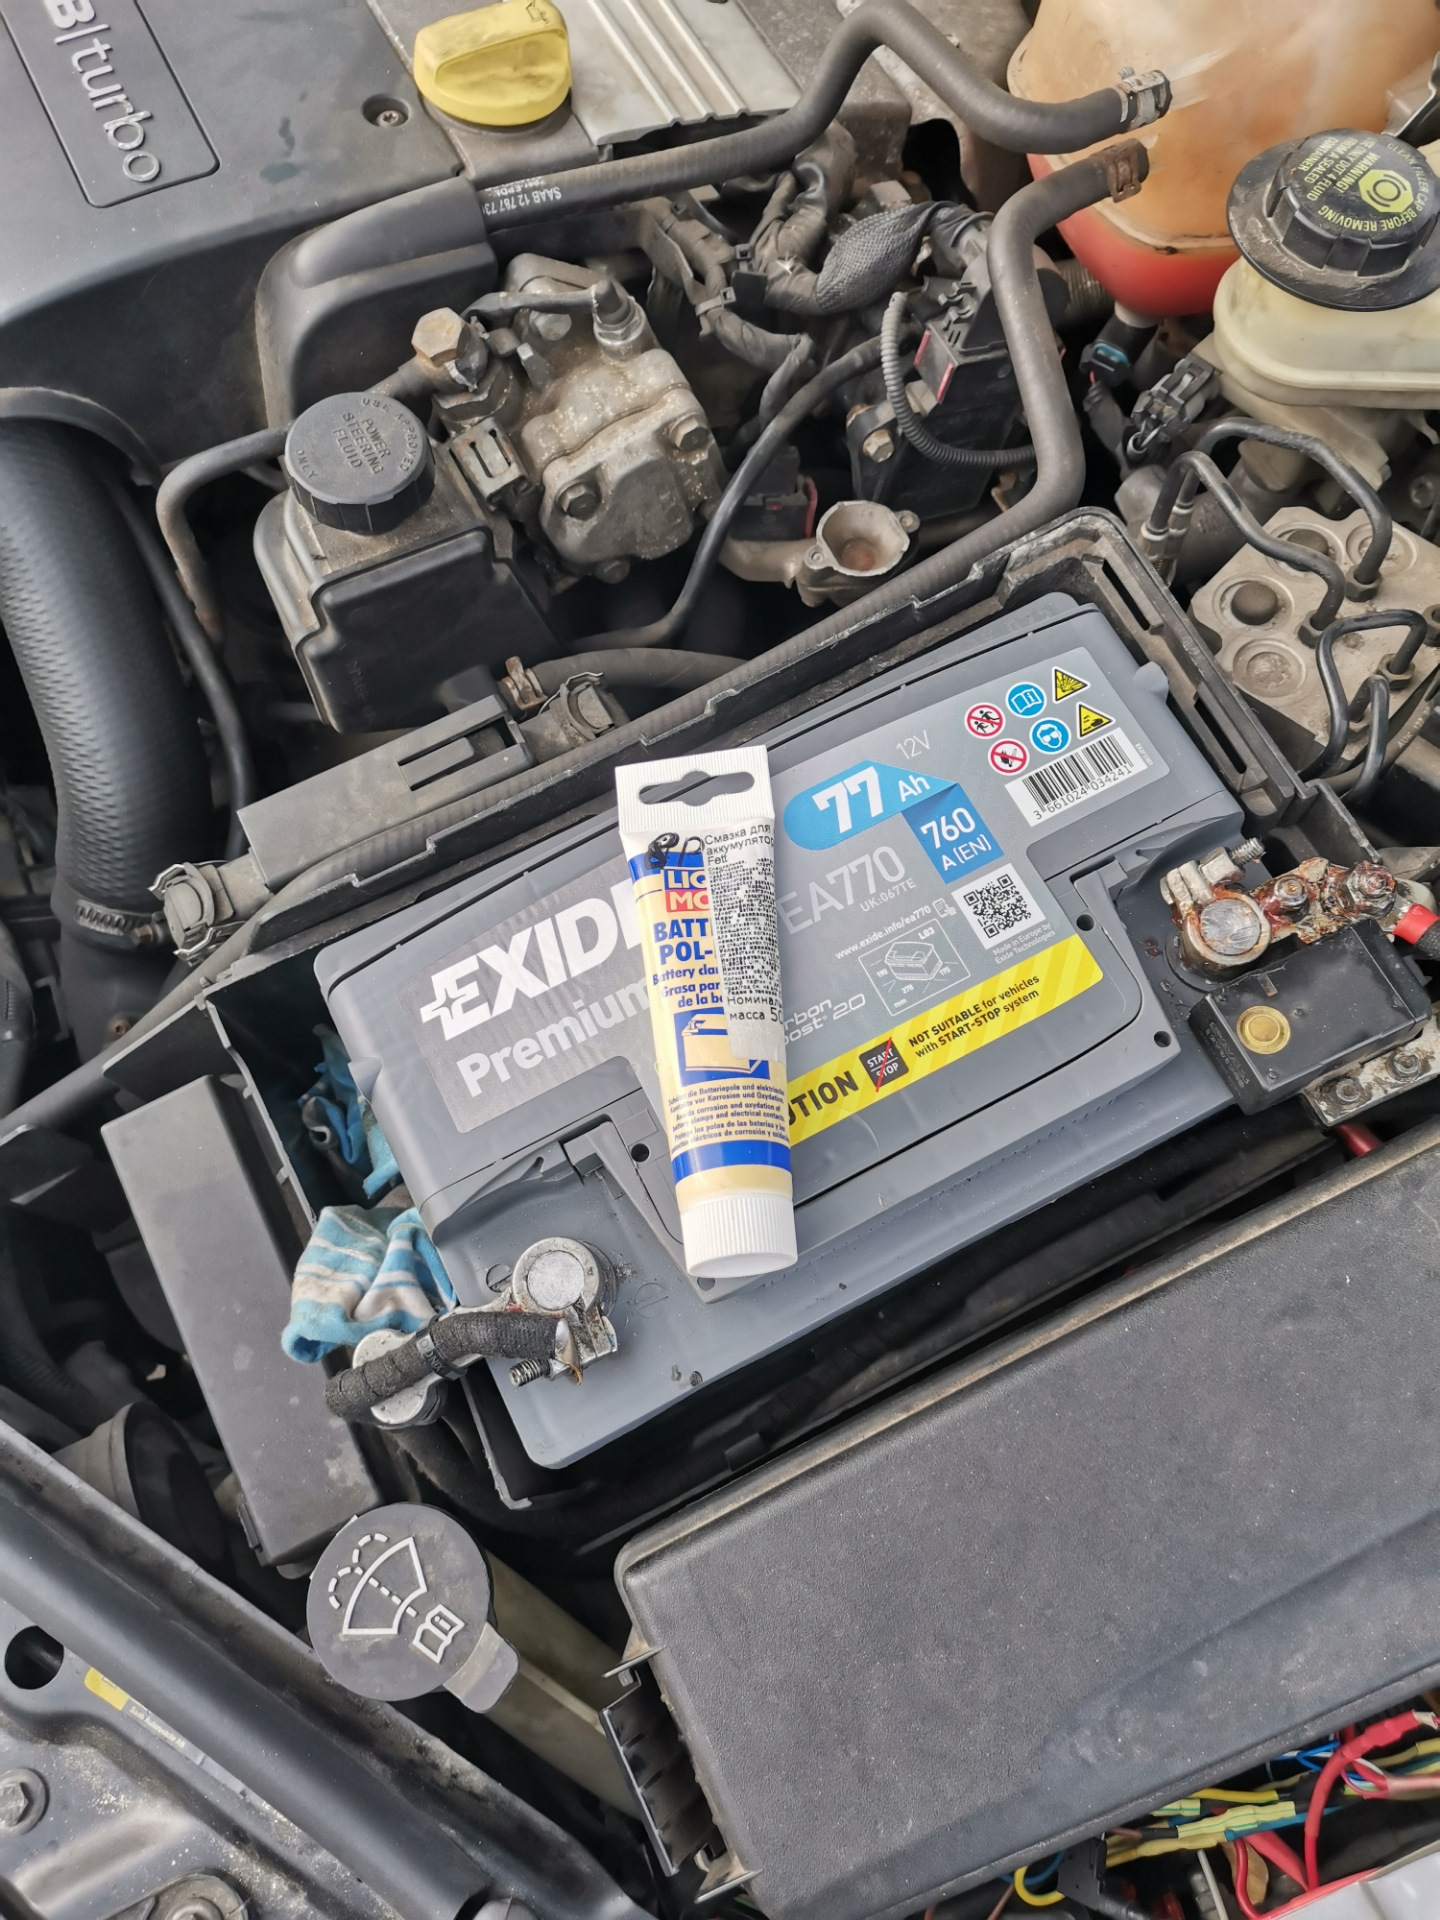 Saab battery replacement